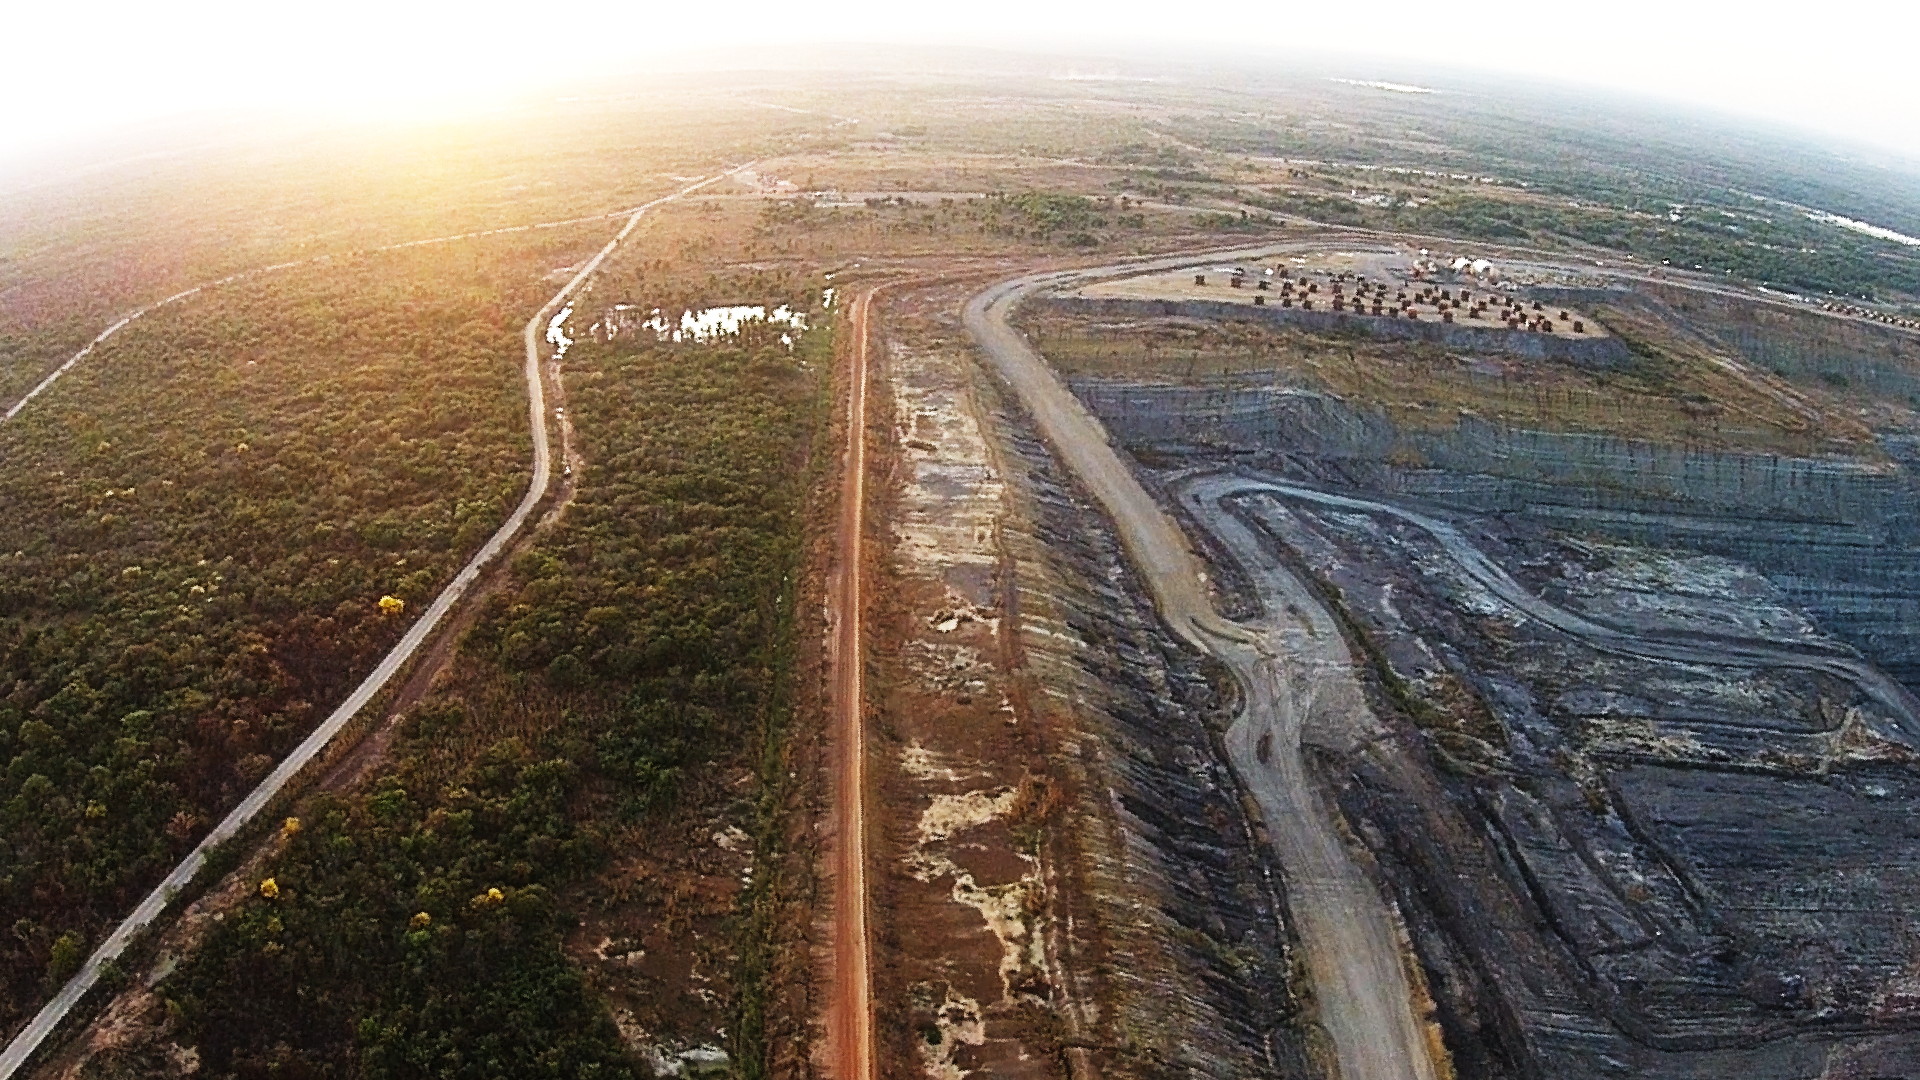 Aerial view of the Calenturitas mine in Cesar. On the left side, you can see a part of what remains of the tropical dry forest in the area, and on the right side, one of the coal extraction pits. In the background, numerous mining machines are parked.